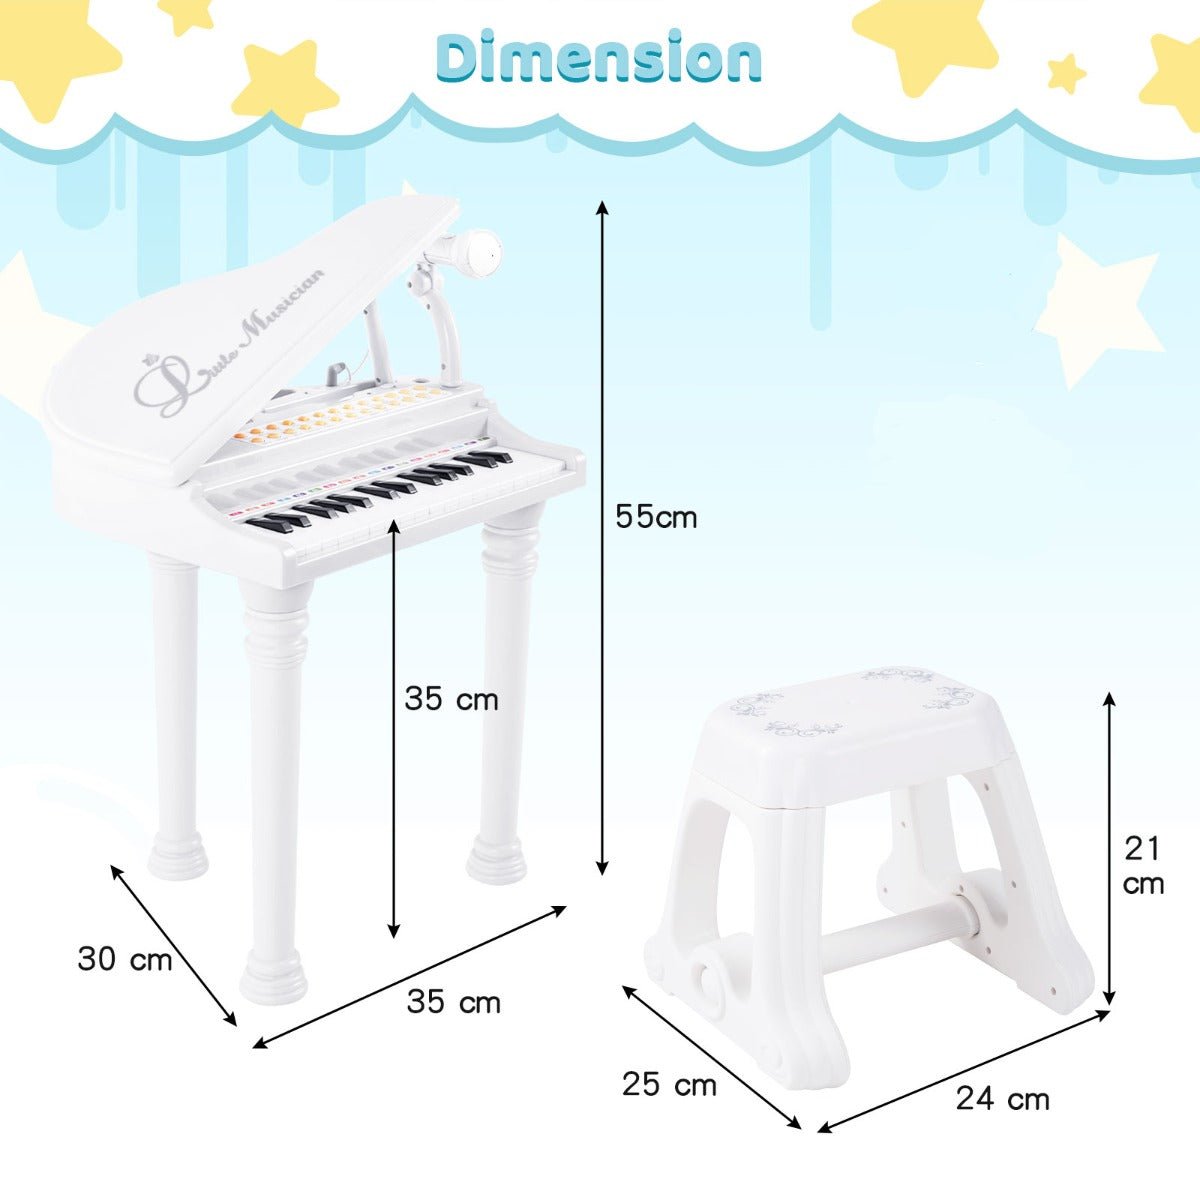 Get the Kids Piano Keyboard with Microphone for Budding Musicians